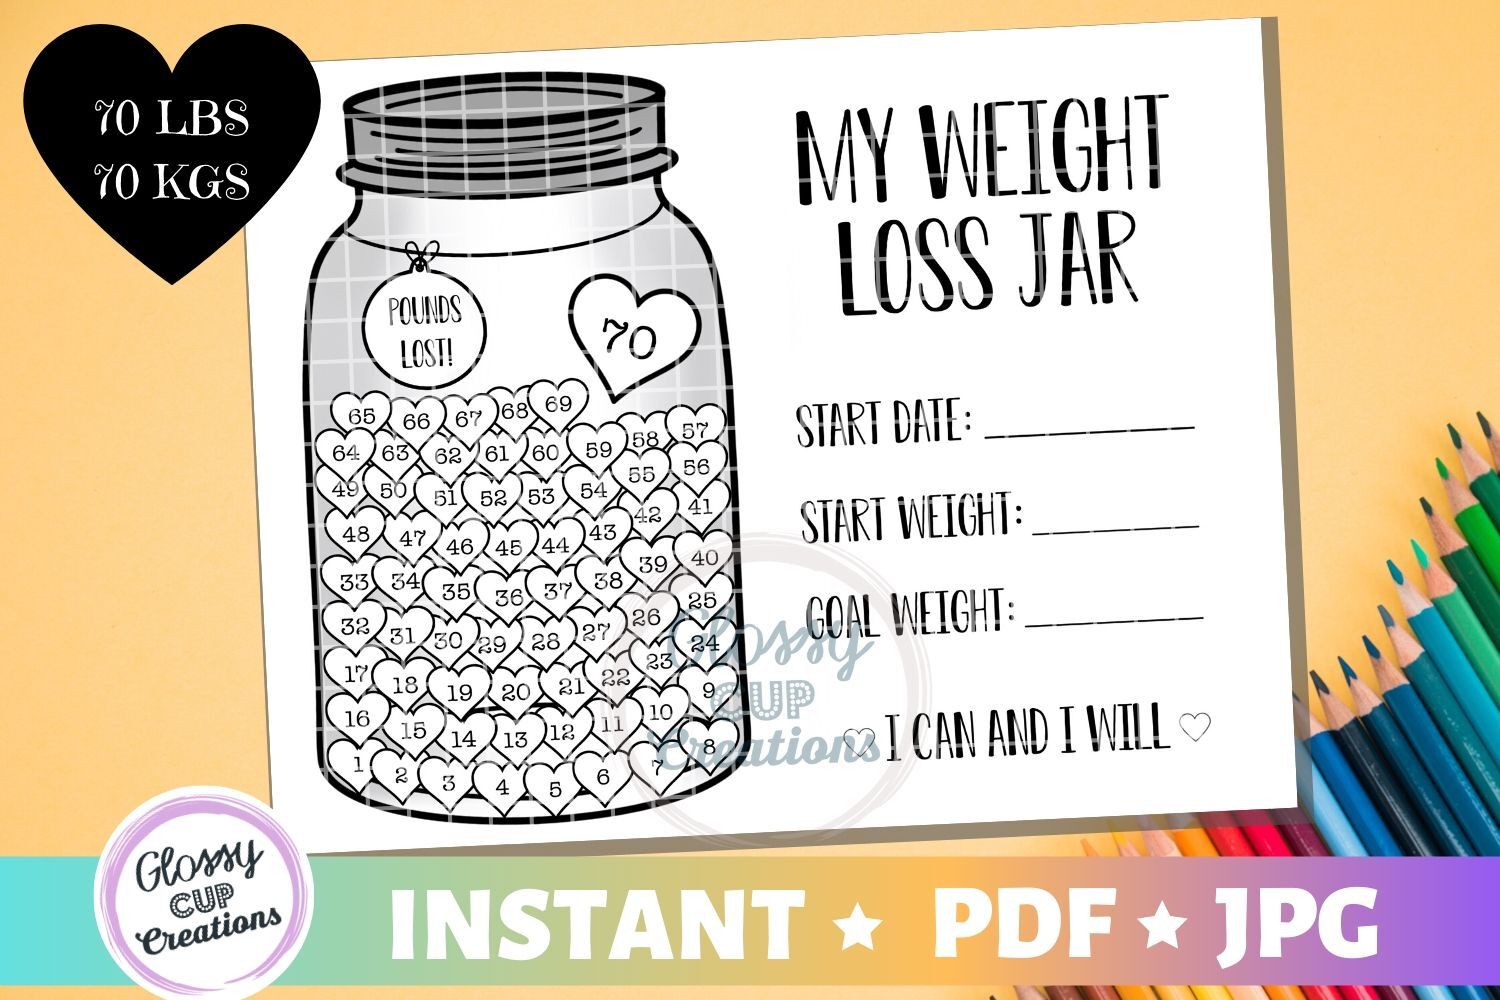 My weight loss jar lbs jpg pdf printable coloring page by glossy cup creations